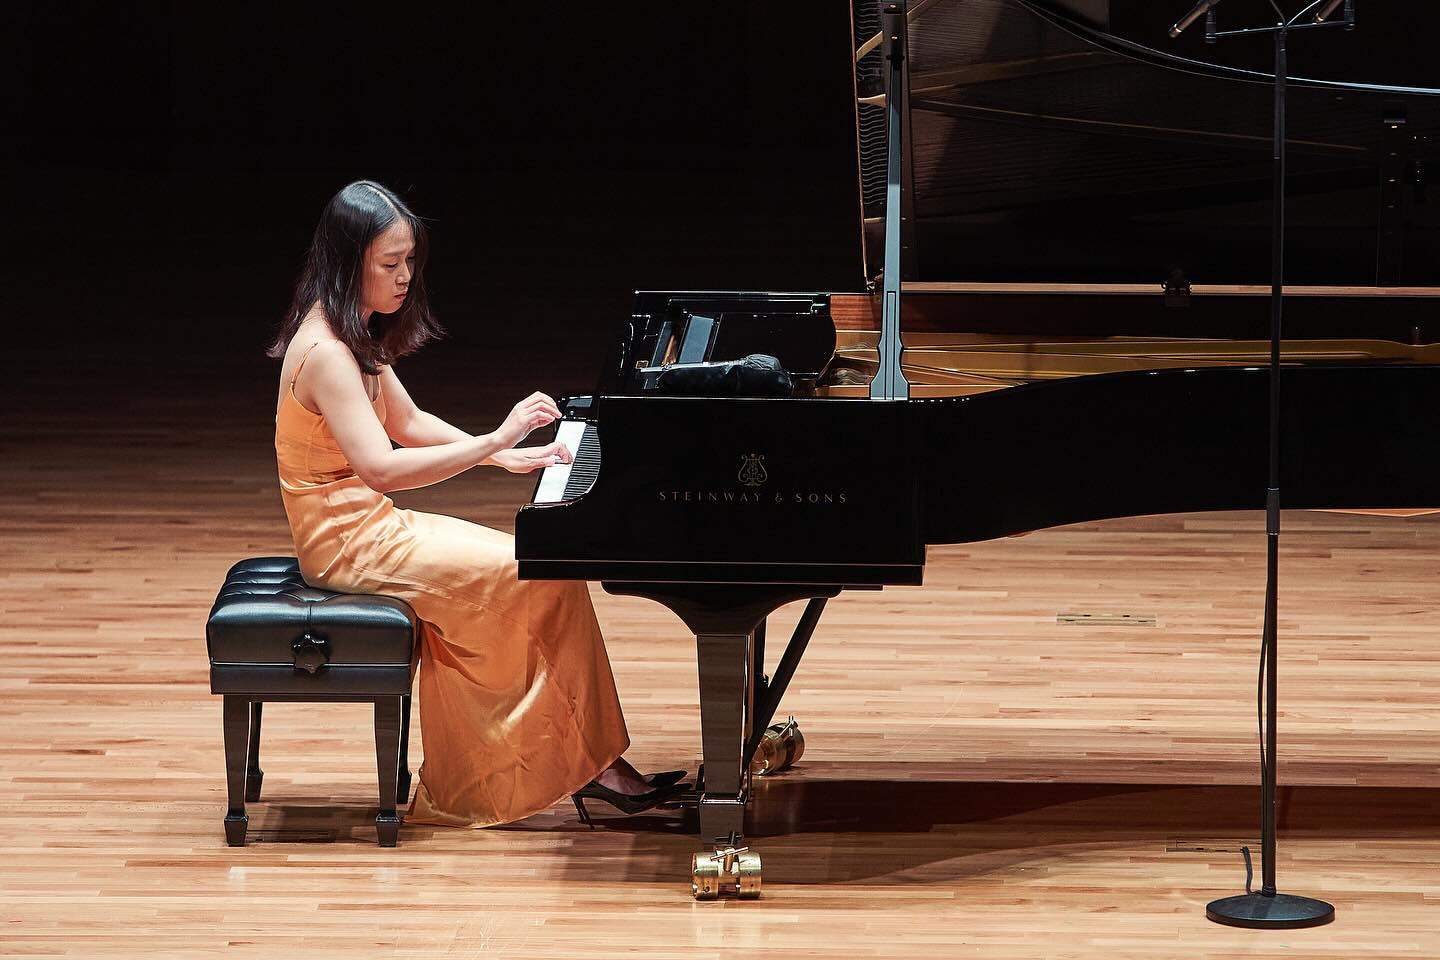 South Korean pianist Son Yeol-eum, who will perform pieces from her album Love Music with Bulgarian-born violinist Svetlin Roussev this month in Seoul, talks about their partnership and changing perceptions of Korean culture in the West, where she felt looked down upon early in her career. Photo: Instagram / @yeoleum